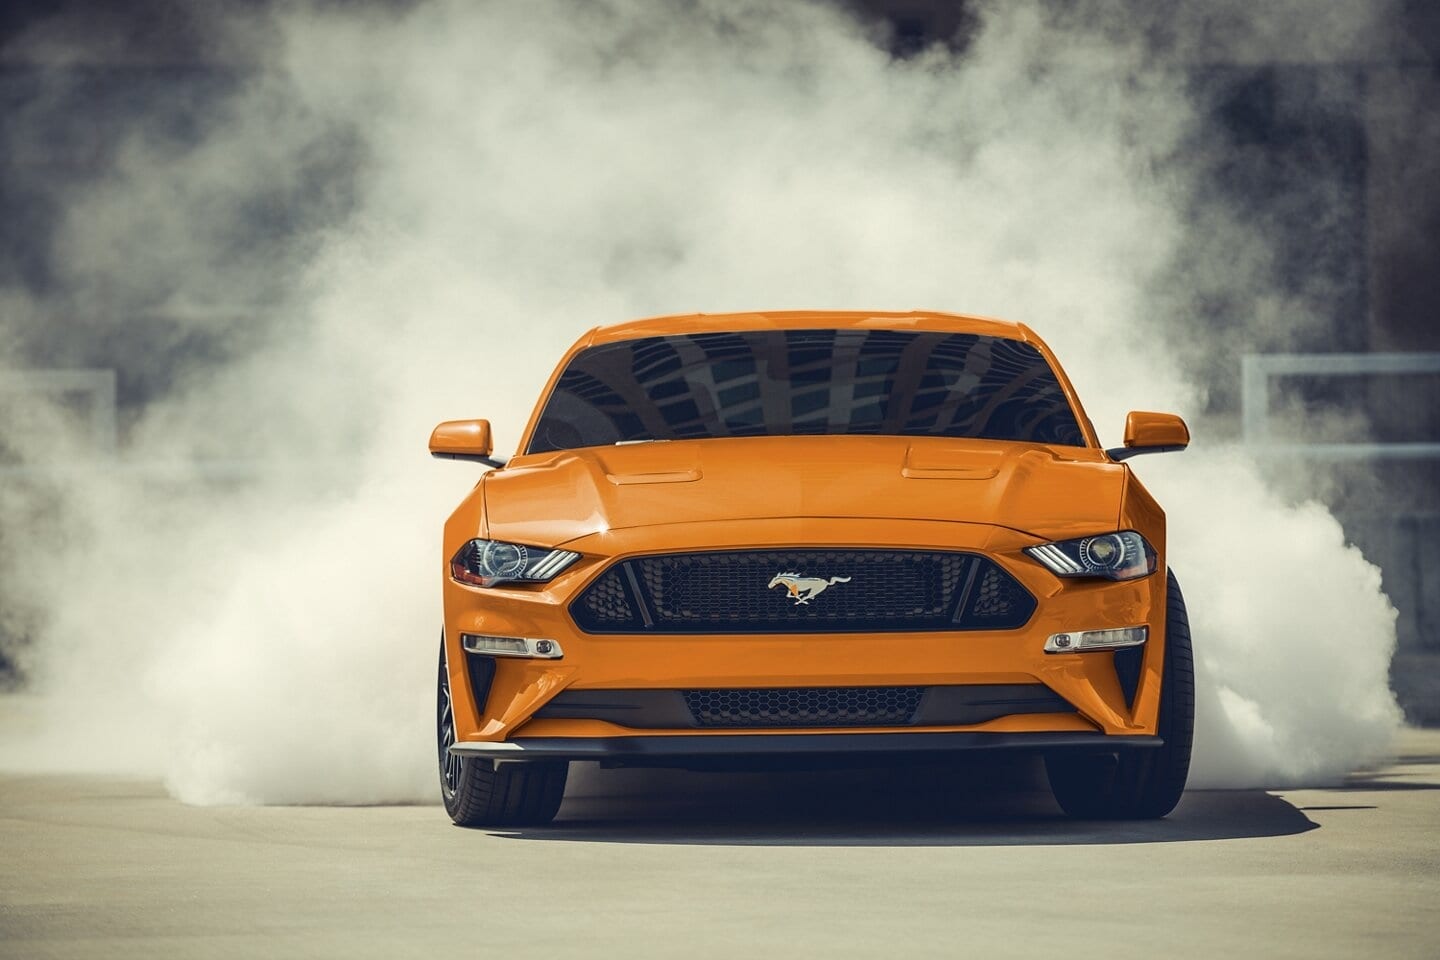 Prestige Ford - The 2020 Ford Mustang is the best Mustang in history near Sanford FL